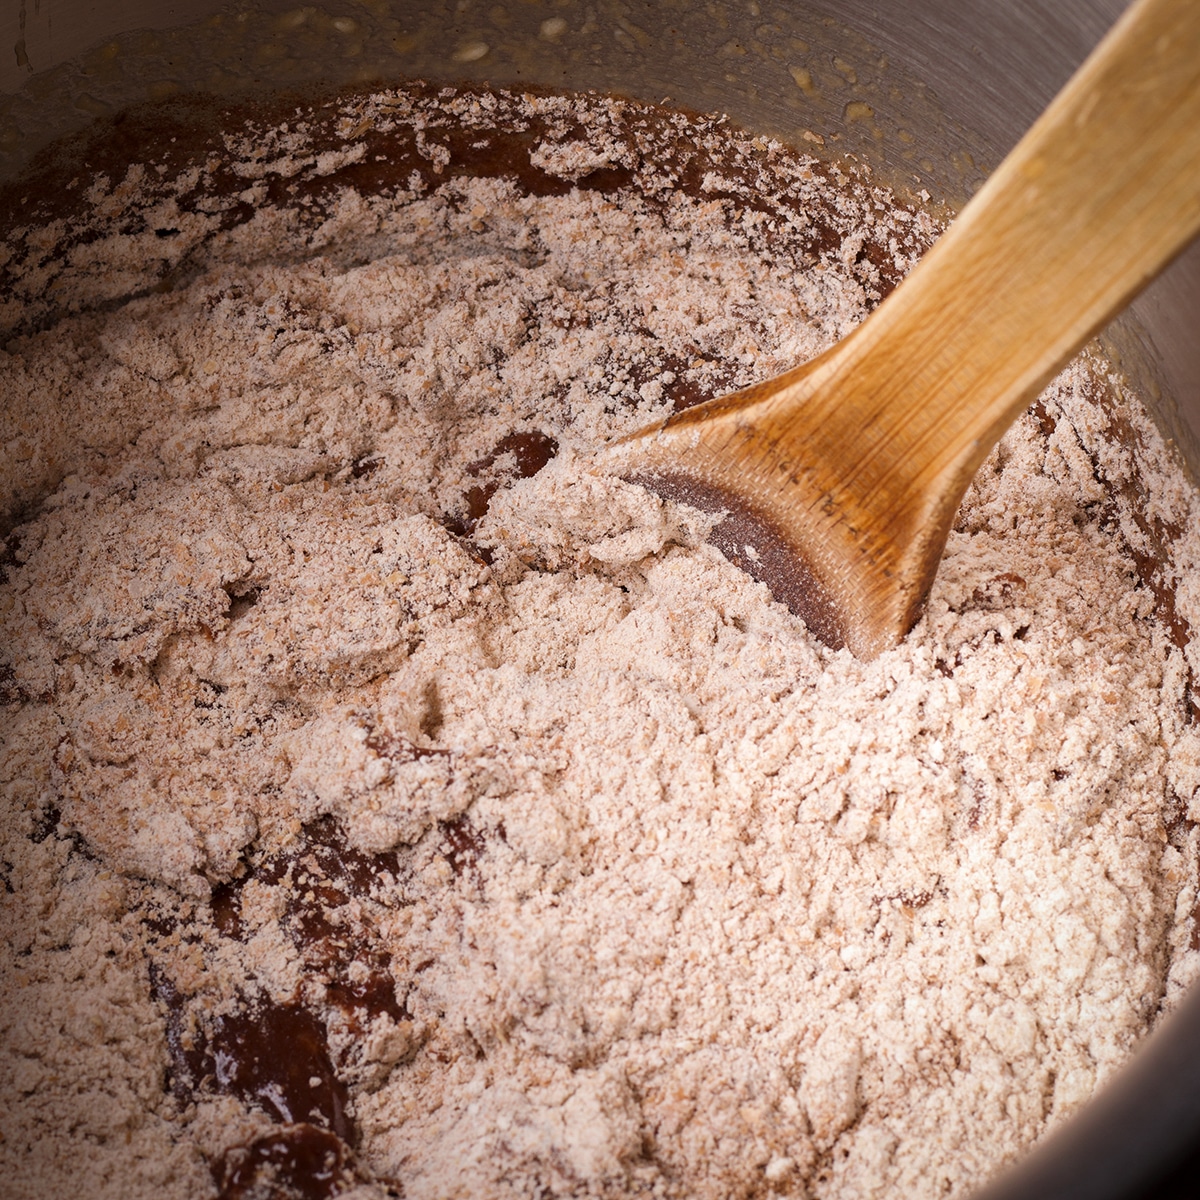 Someone using a wooden spoon to stir the dry ingredients into chocolate banana muffin batter.